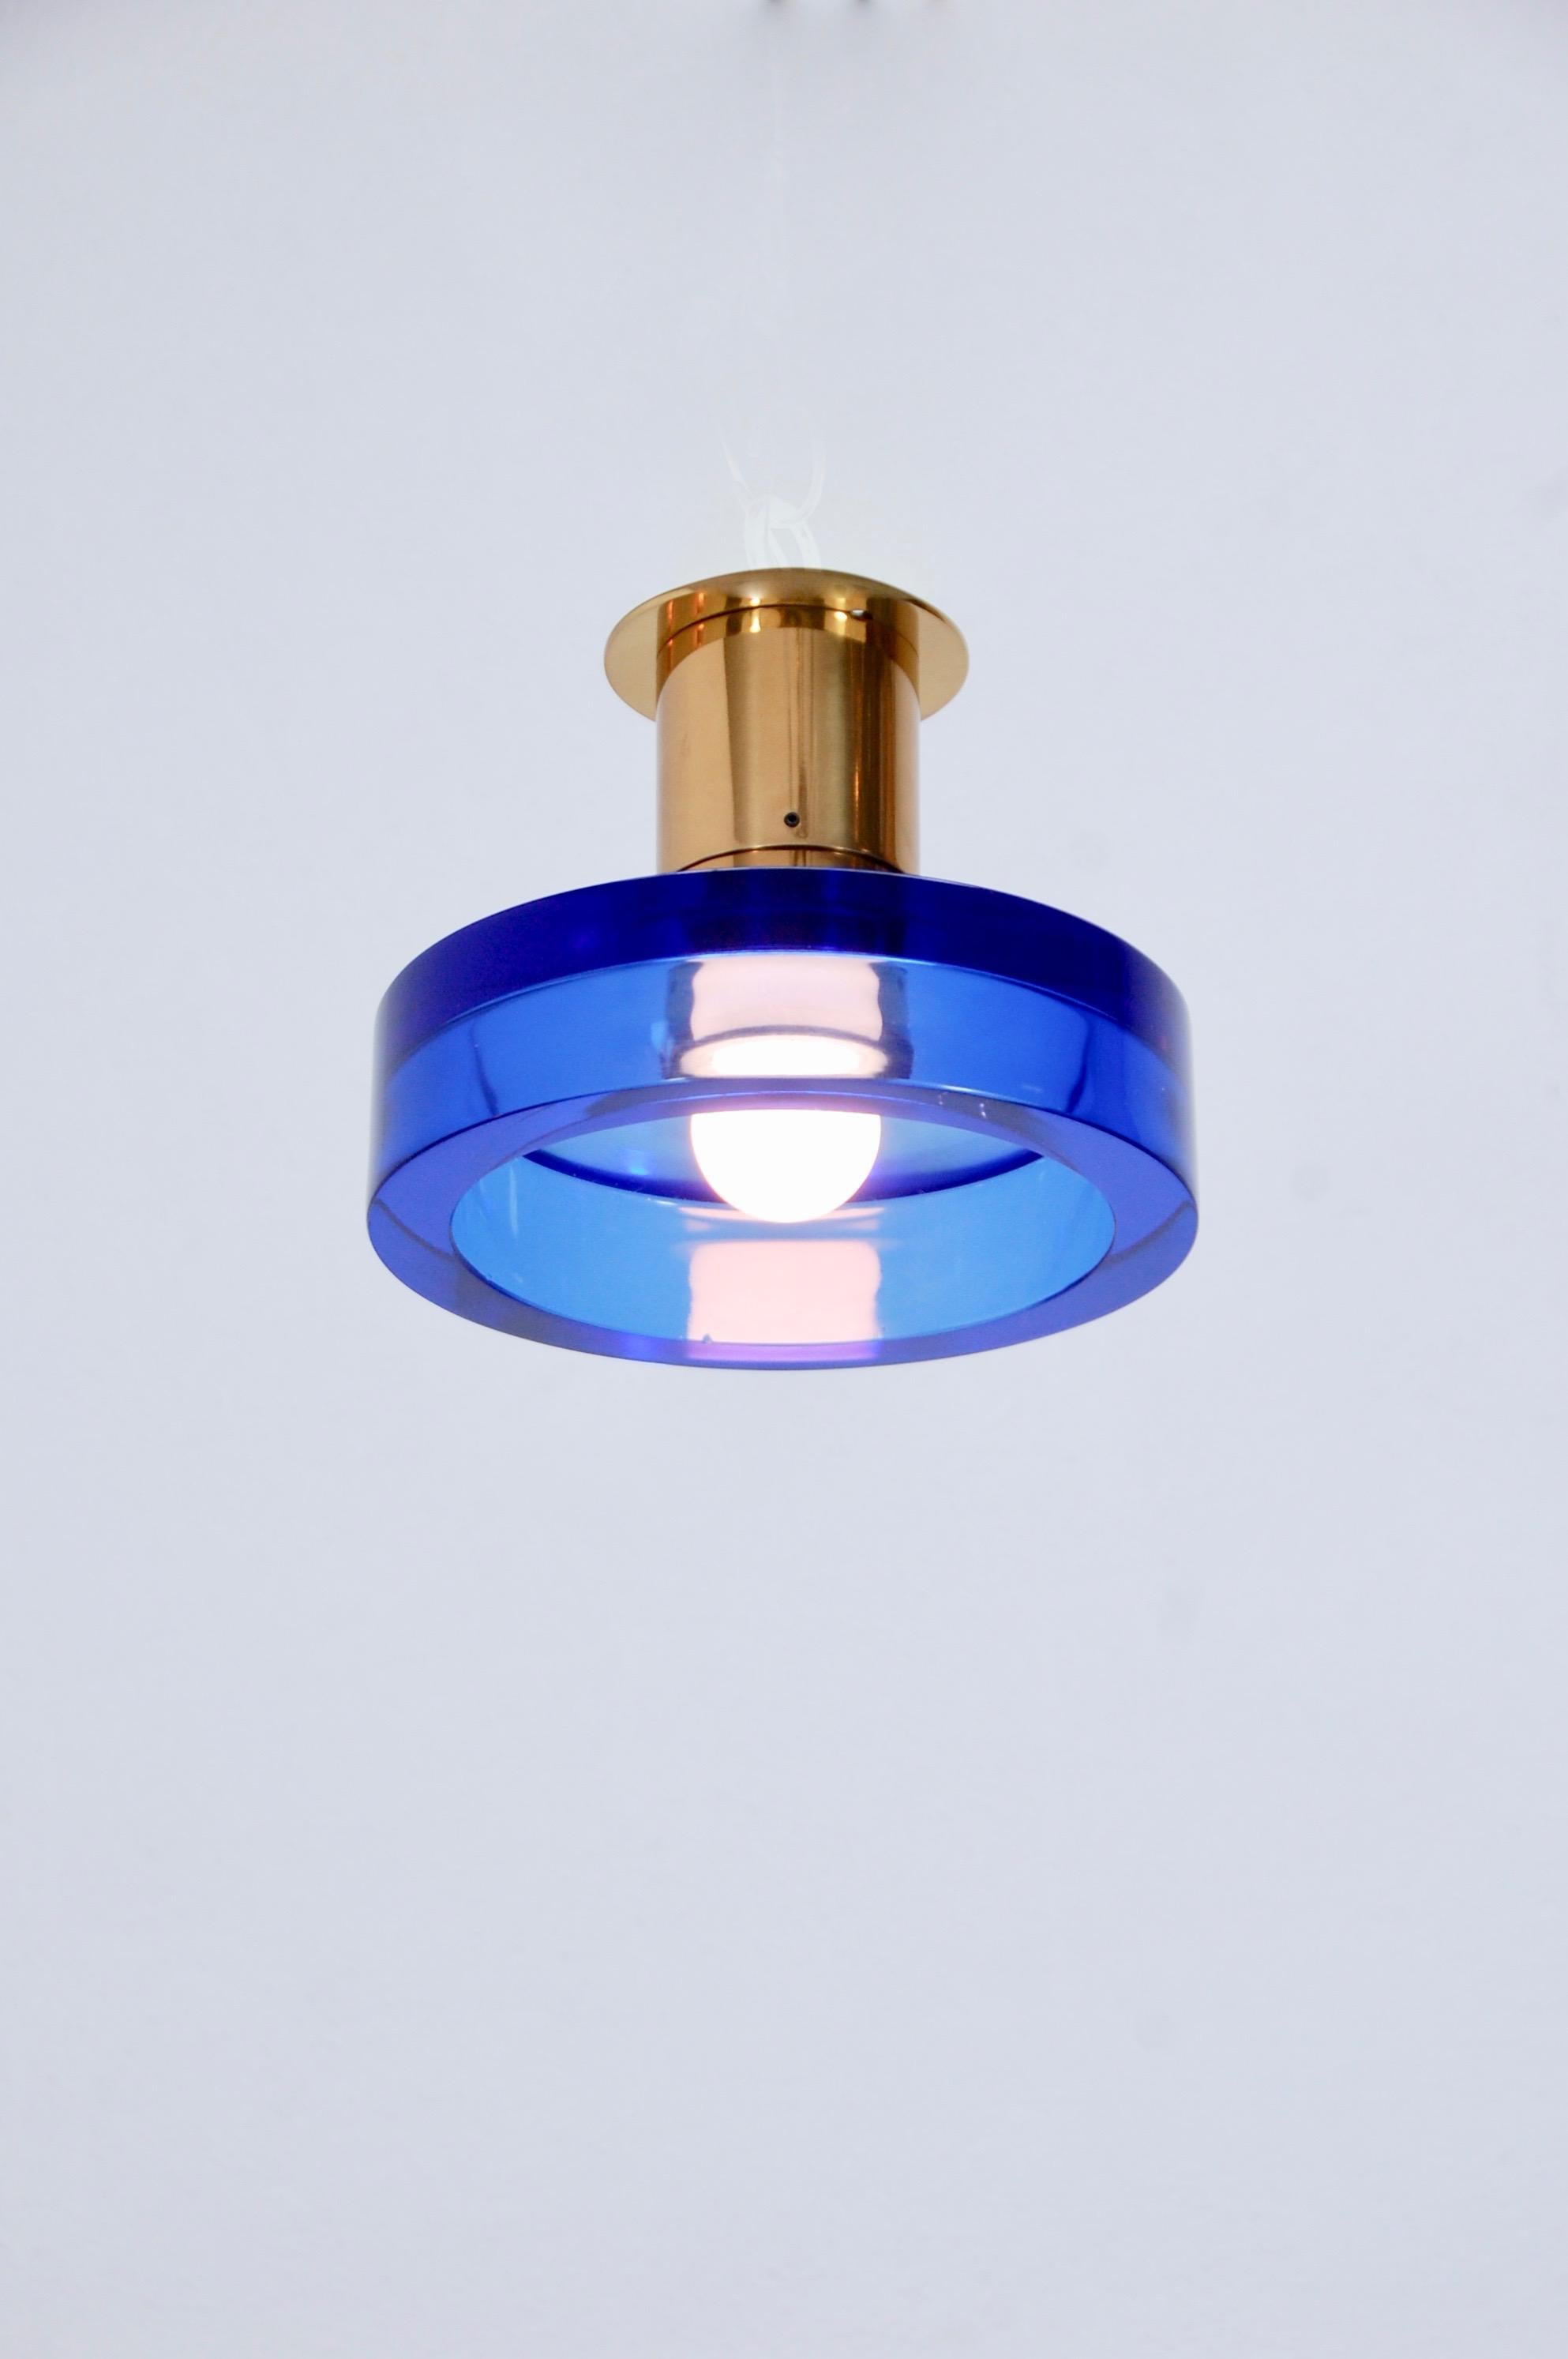 Sapphire Seguso ceiling fixture from midcentury, Italy. Partially restored. (1) E26 medium based socket in the fixture. Made in brass and glass. Currently wired for use in the US. Lightbulb included.